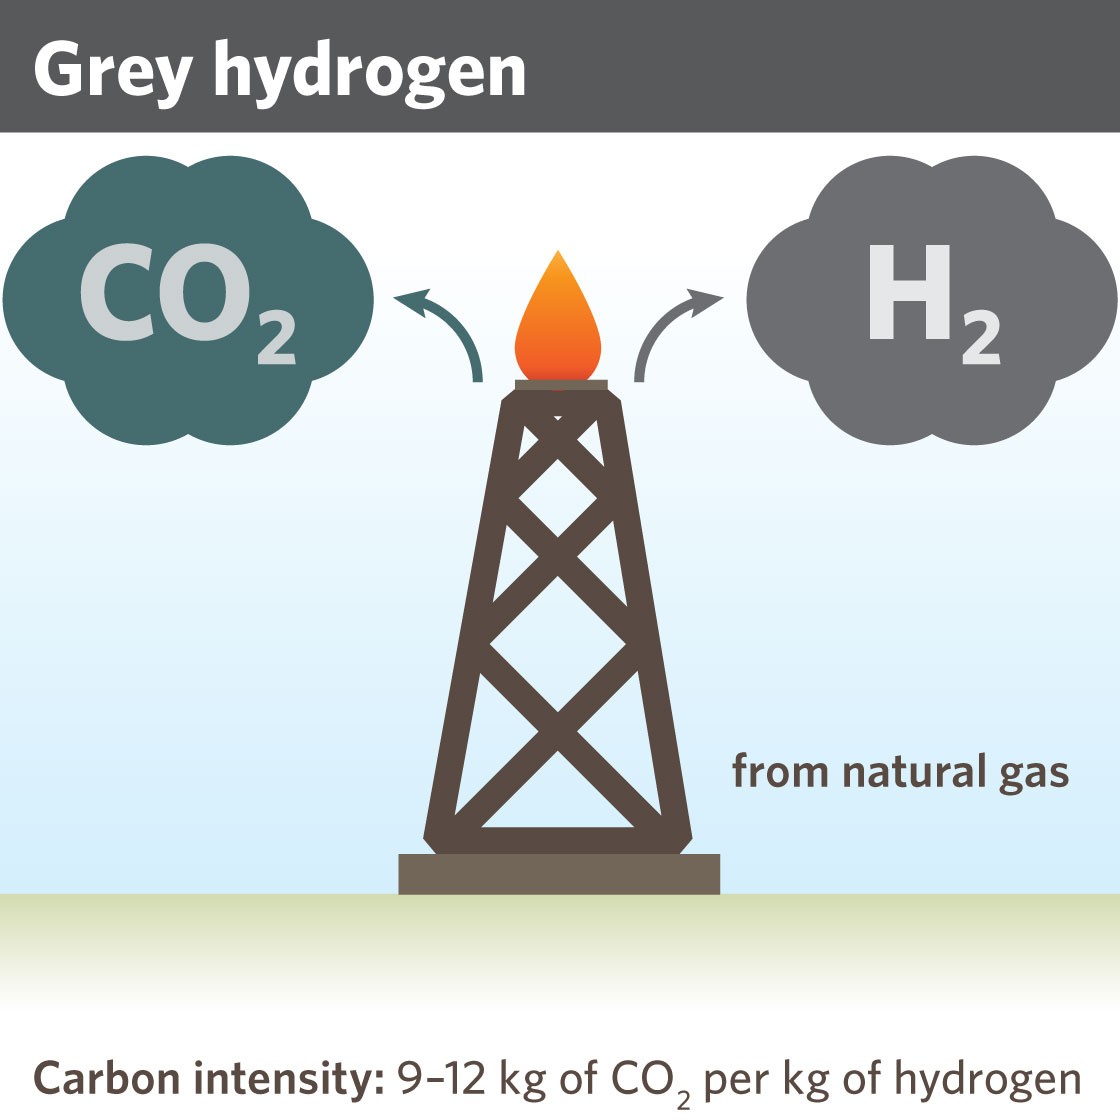 Grey hydrogen illustration. Grey hydrogen is produced from natural gas, and results in both hydrogen and carbon dioxide. The carbon dioxide is let out in the atmosphere. This method of producing hydrogen creates 9-12 kg of carbon dioxide per kg of hydrogen..